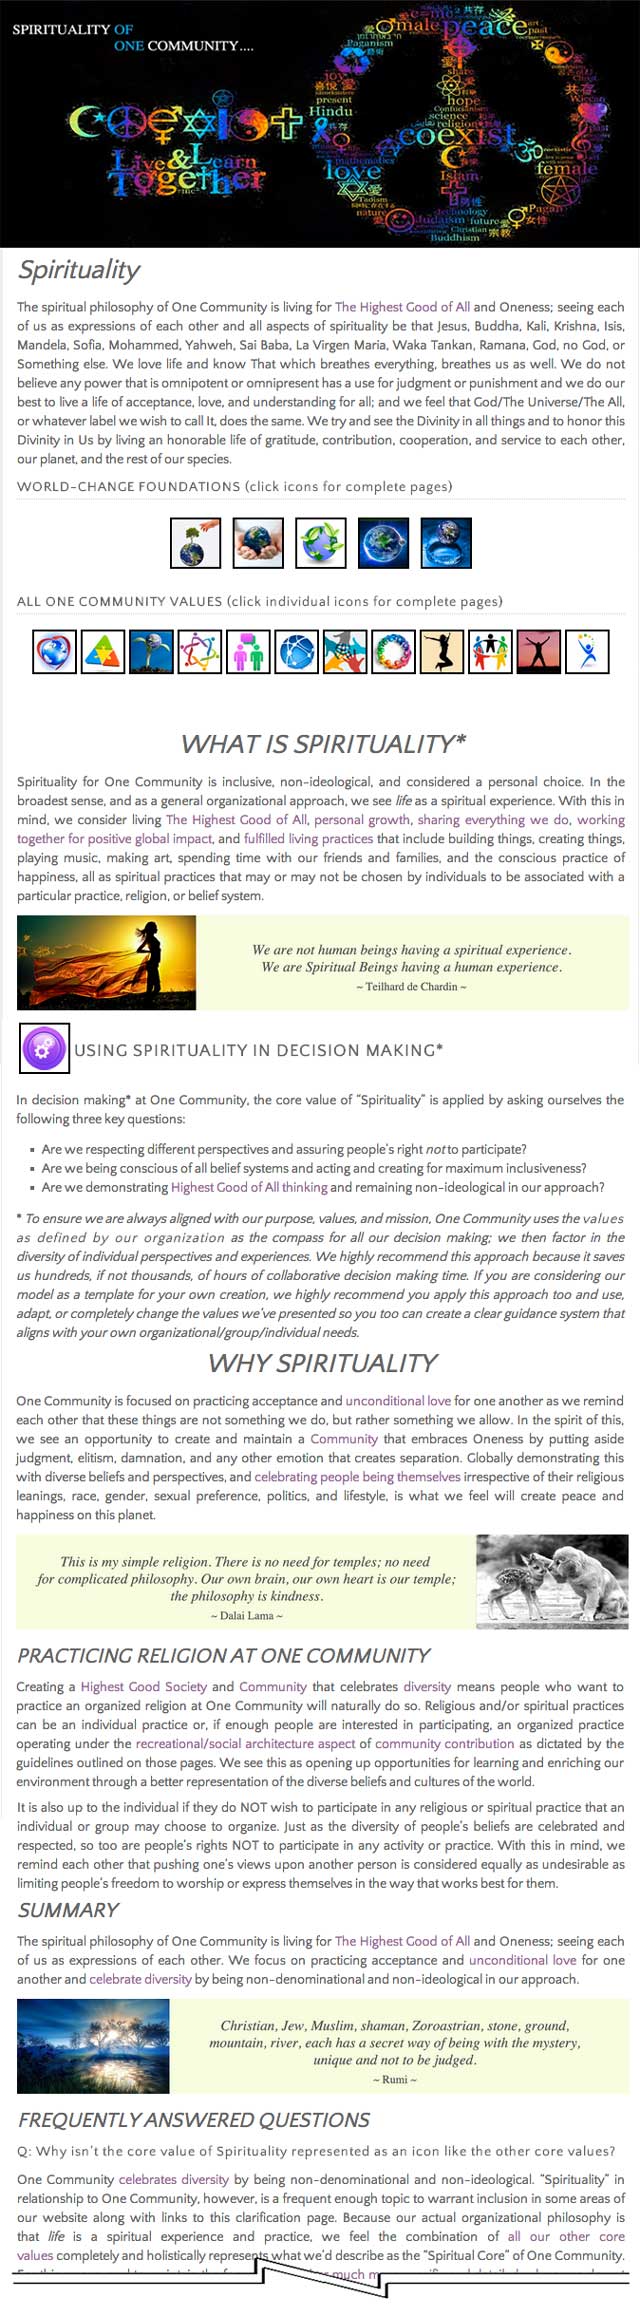 Spirituality page, One Community, Advancing the Standard of Living